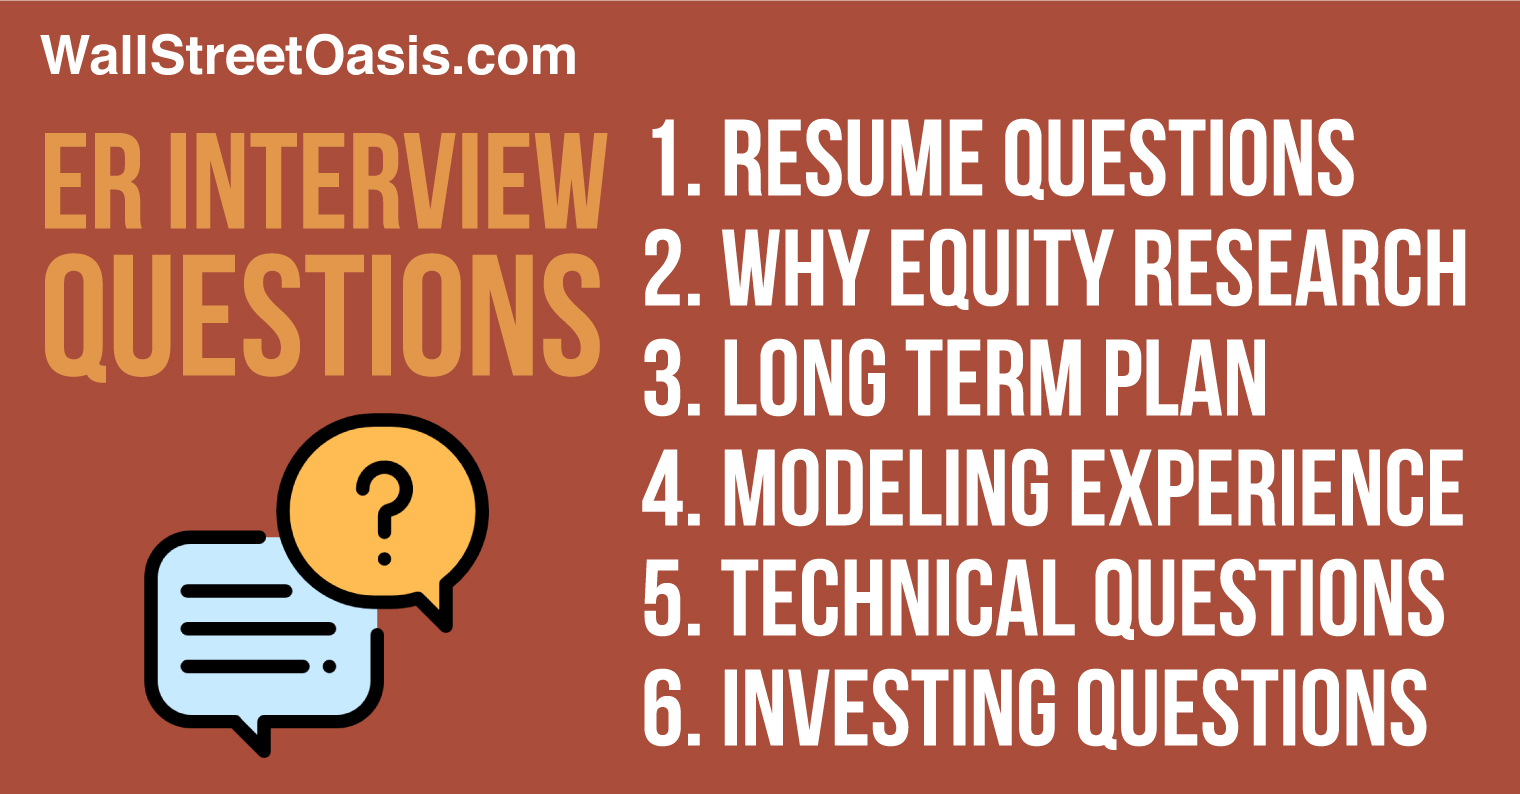 equity research job interview questions